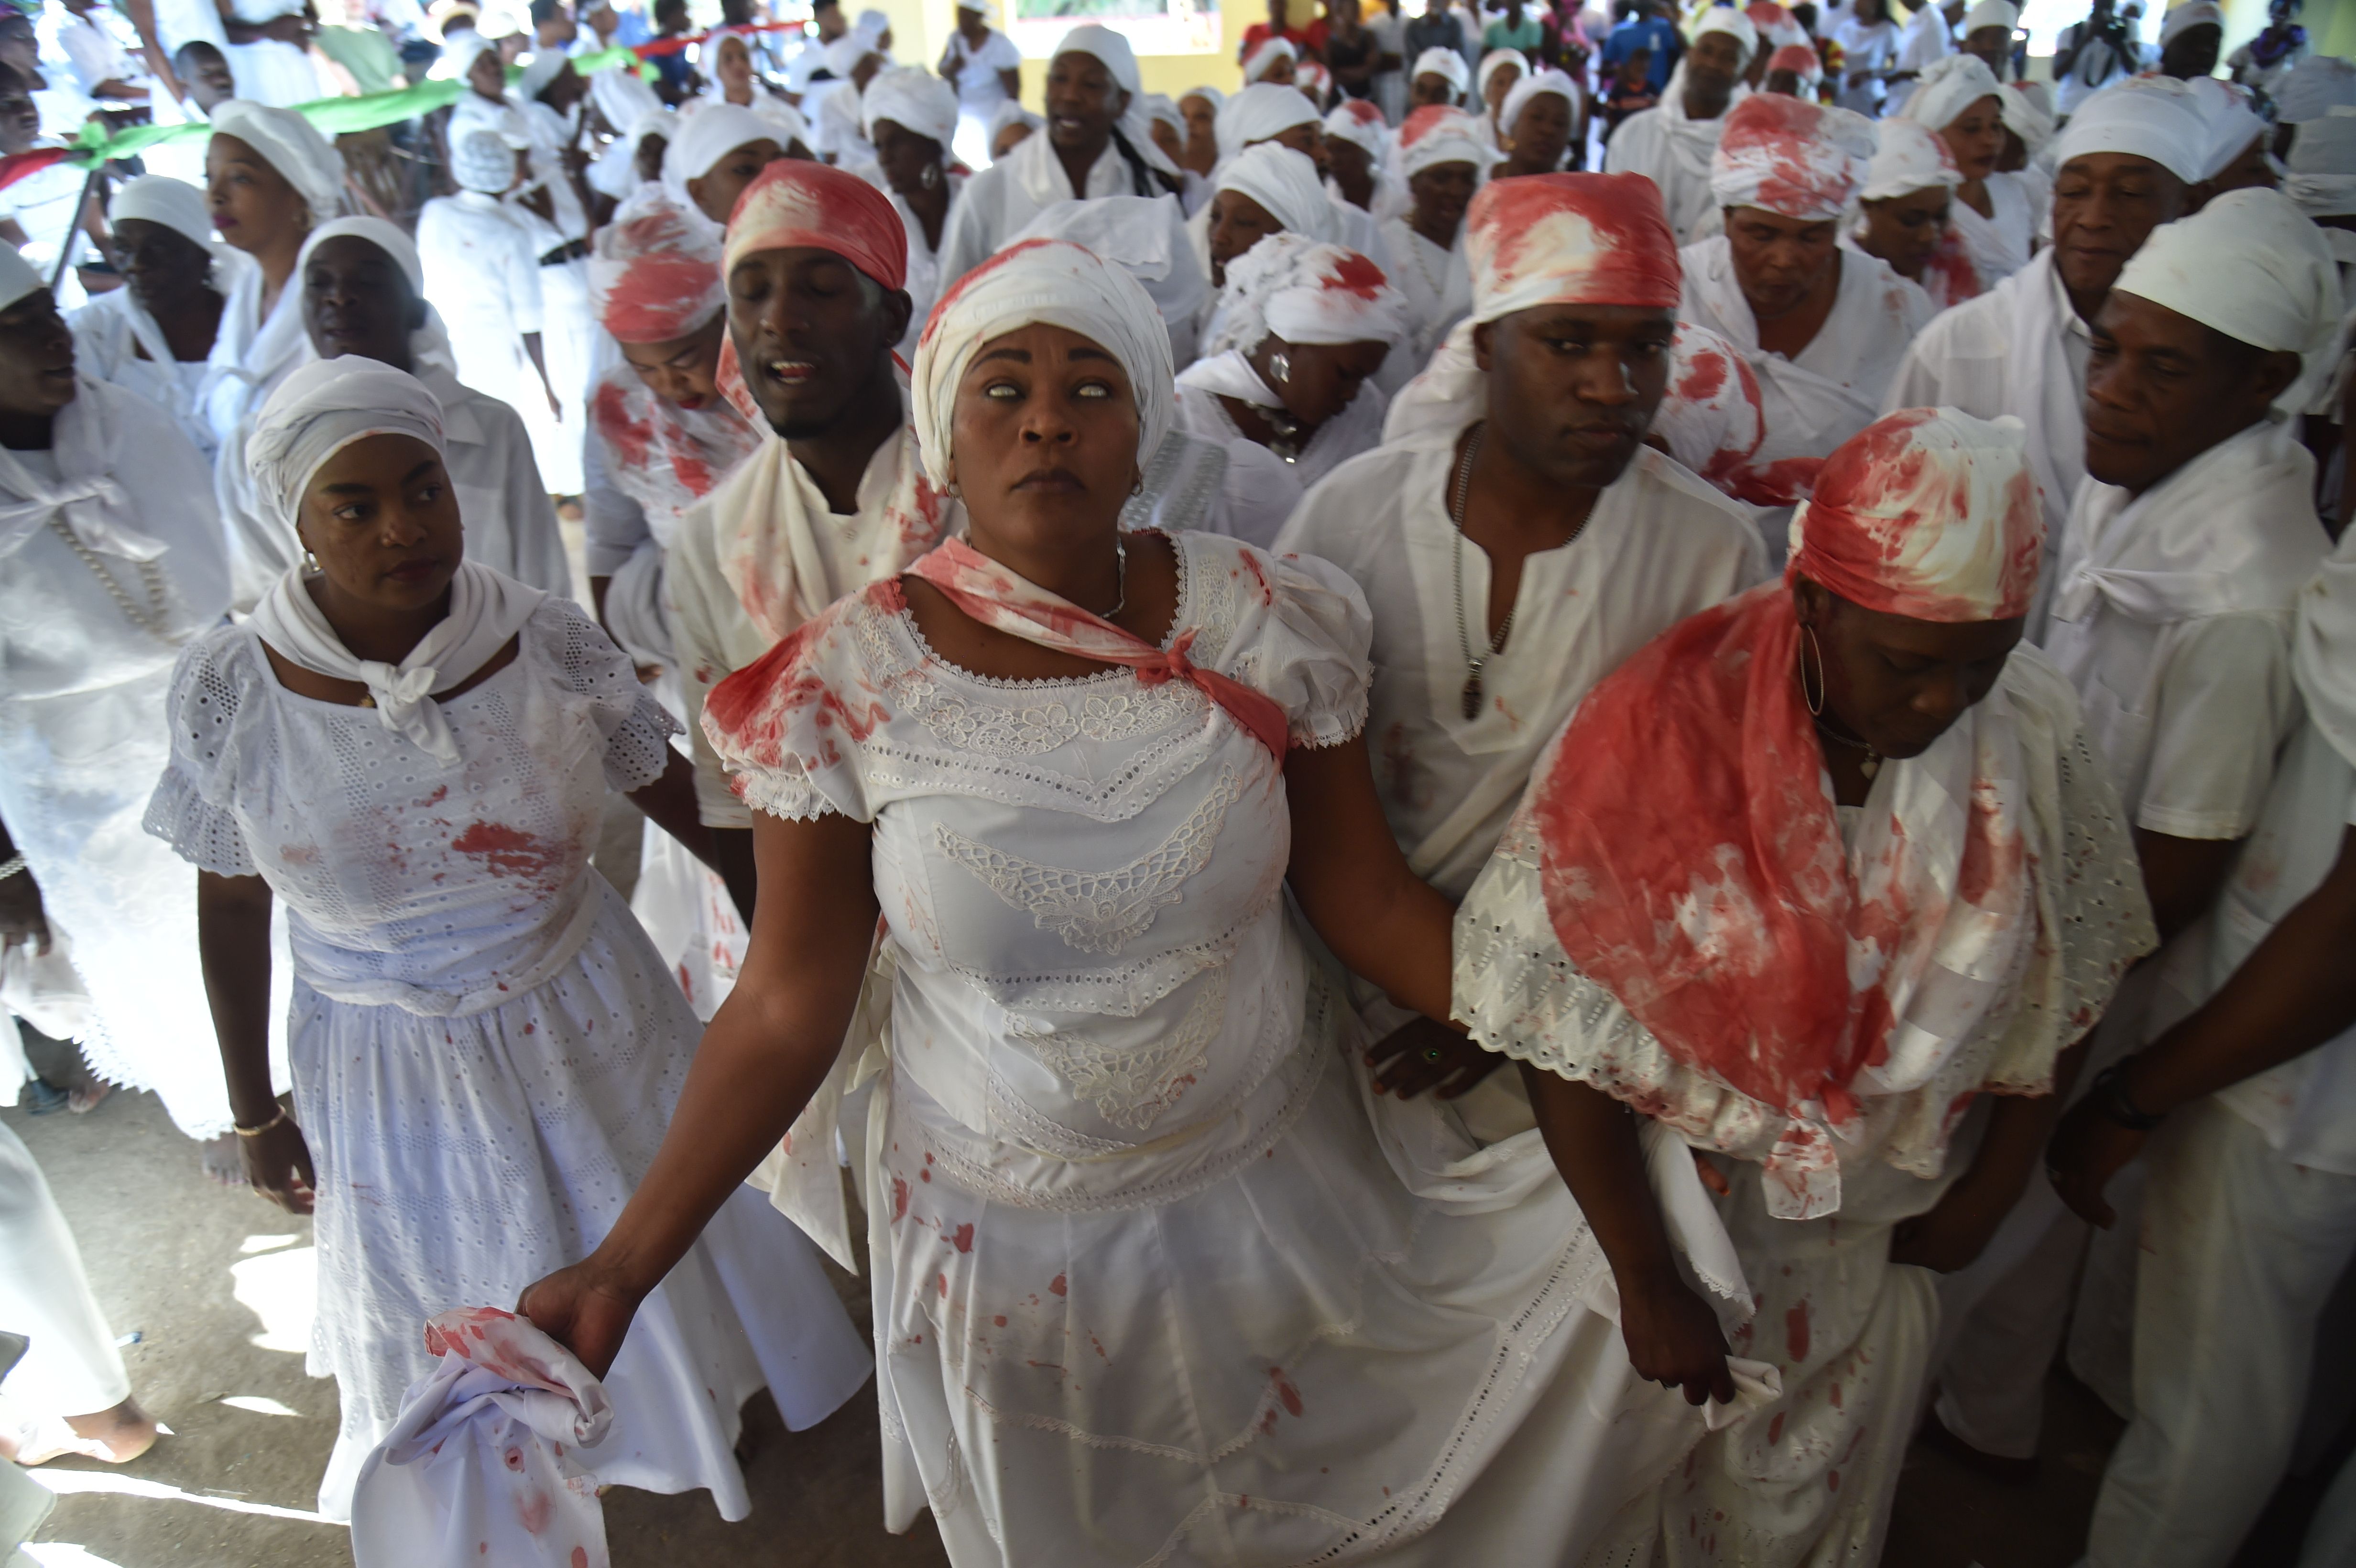 TOPSHOT - A Haitian voodoo follower wearing white clothes is seen in trance while participate in a voodoo ceremony in Souvenance, a suburb of Gonaives, 171km north of Port-au-Prince, on April 1, 2018. Haitian voodoo followers arrived in Souvenance to take part in the voodoo ceremonies held during Easter weekend. (HECTOR RETAMAL/AFP/Getty Images)